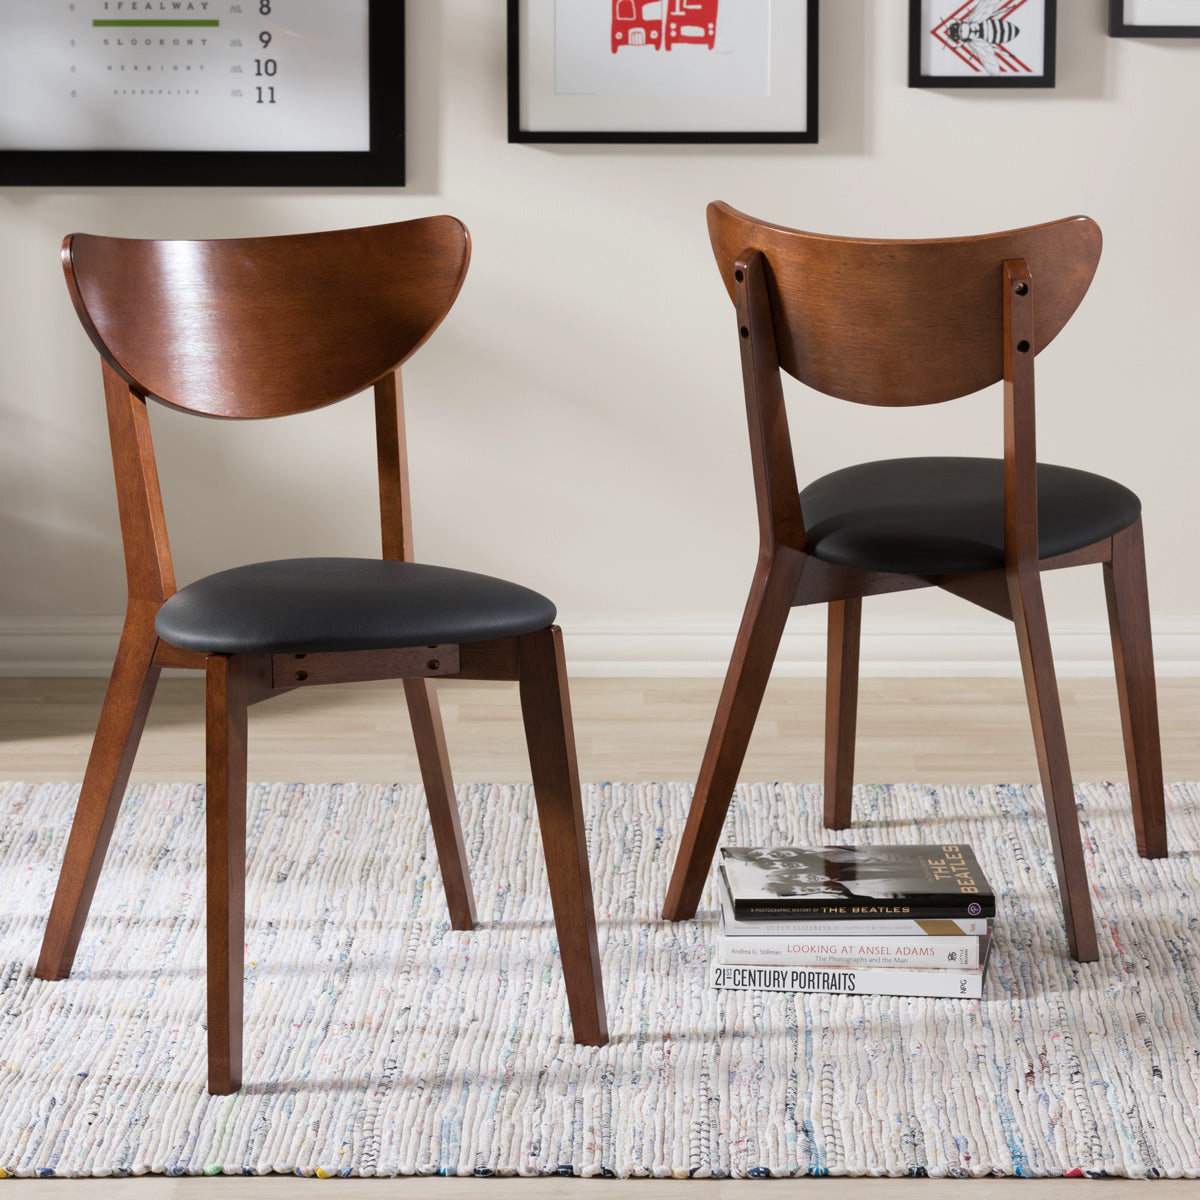 Baxton Studio Sumner Mid-Century Black Faux Leather and Walnut Brown Dining Chair Baxton Studio-dining chair-Minimal And Modern - 1